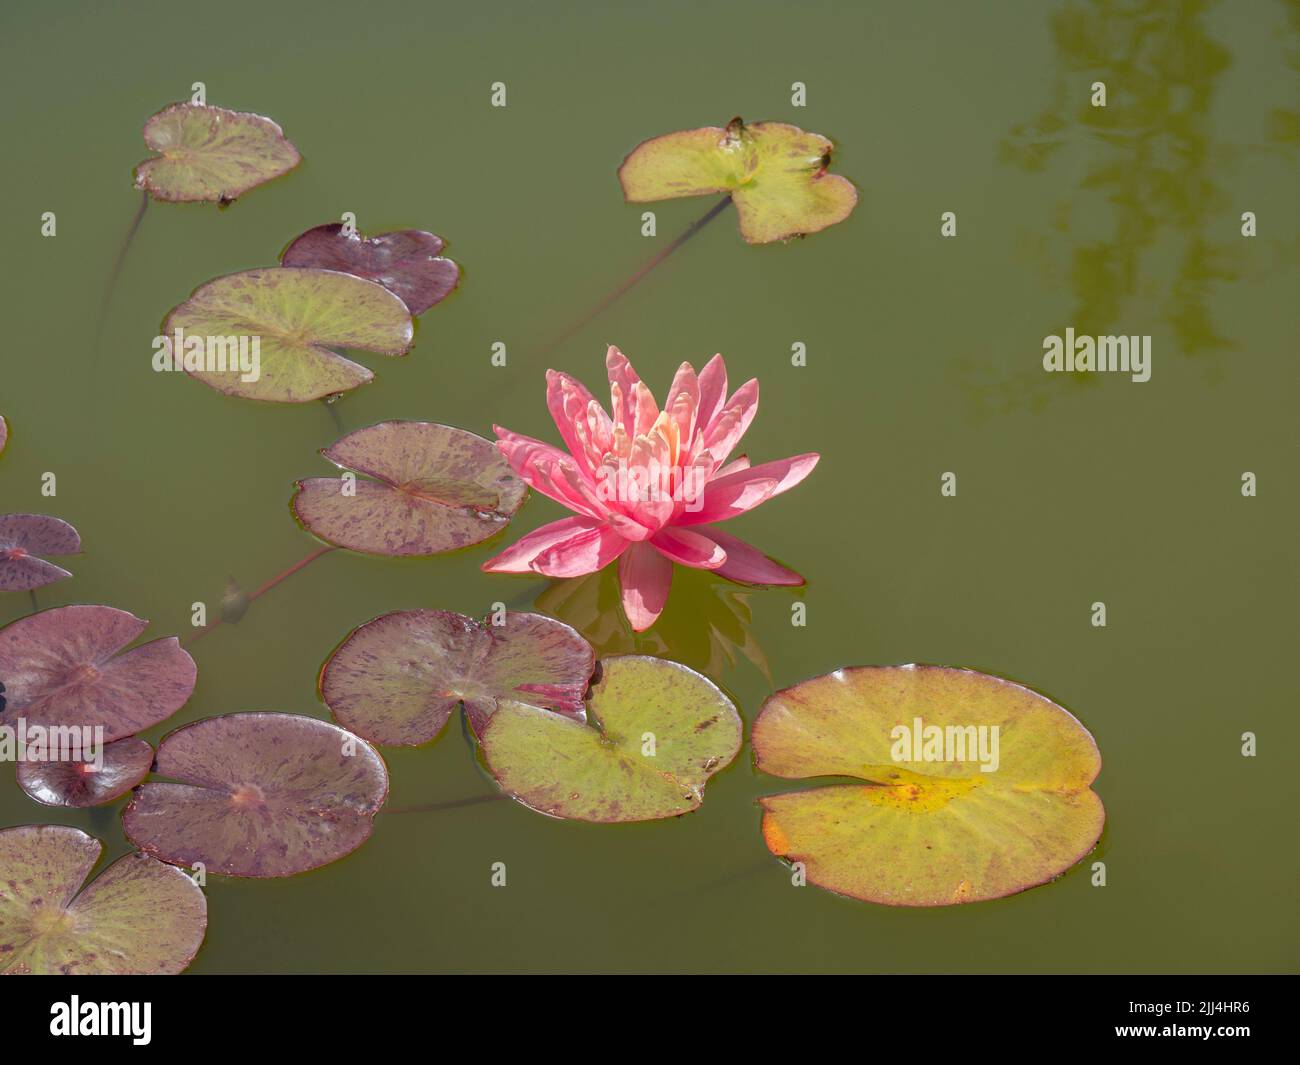 A pink water lily floats lonely between leaves on the greenish water Stock Photo